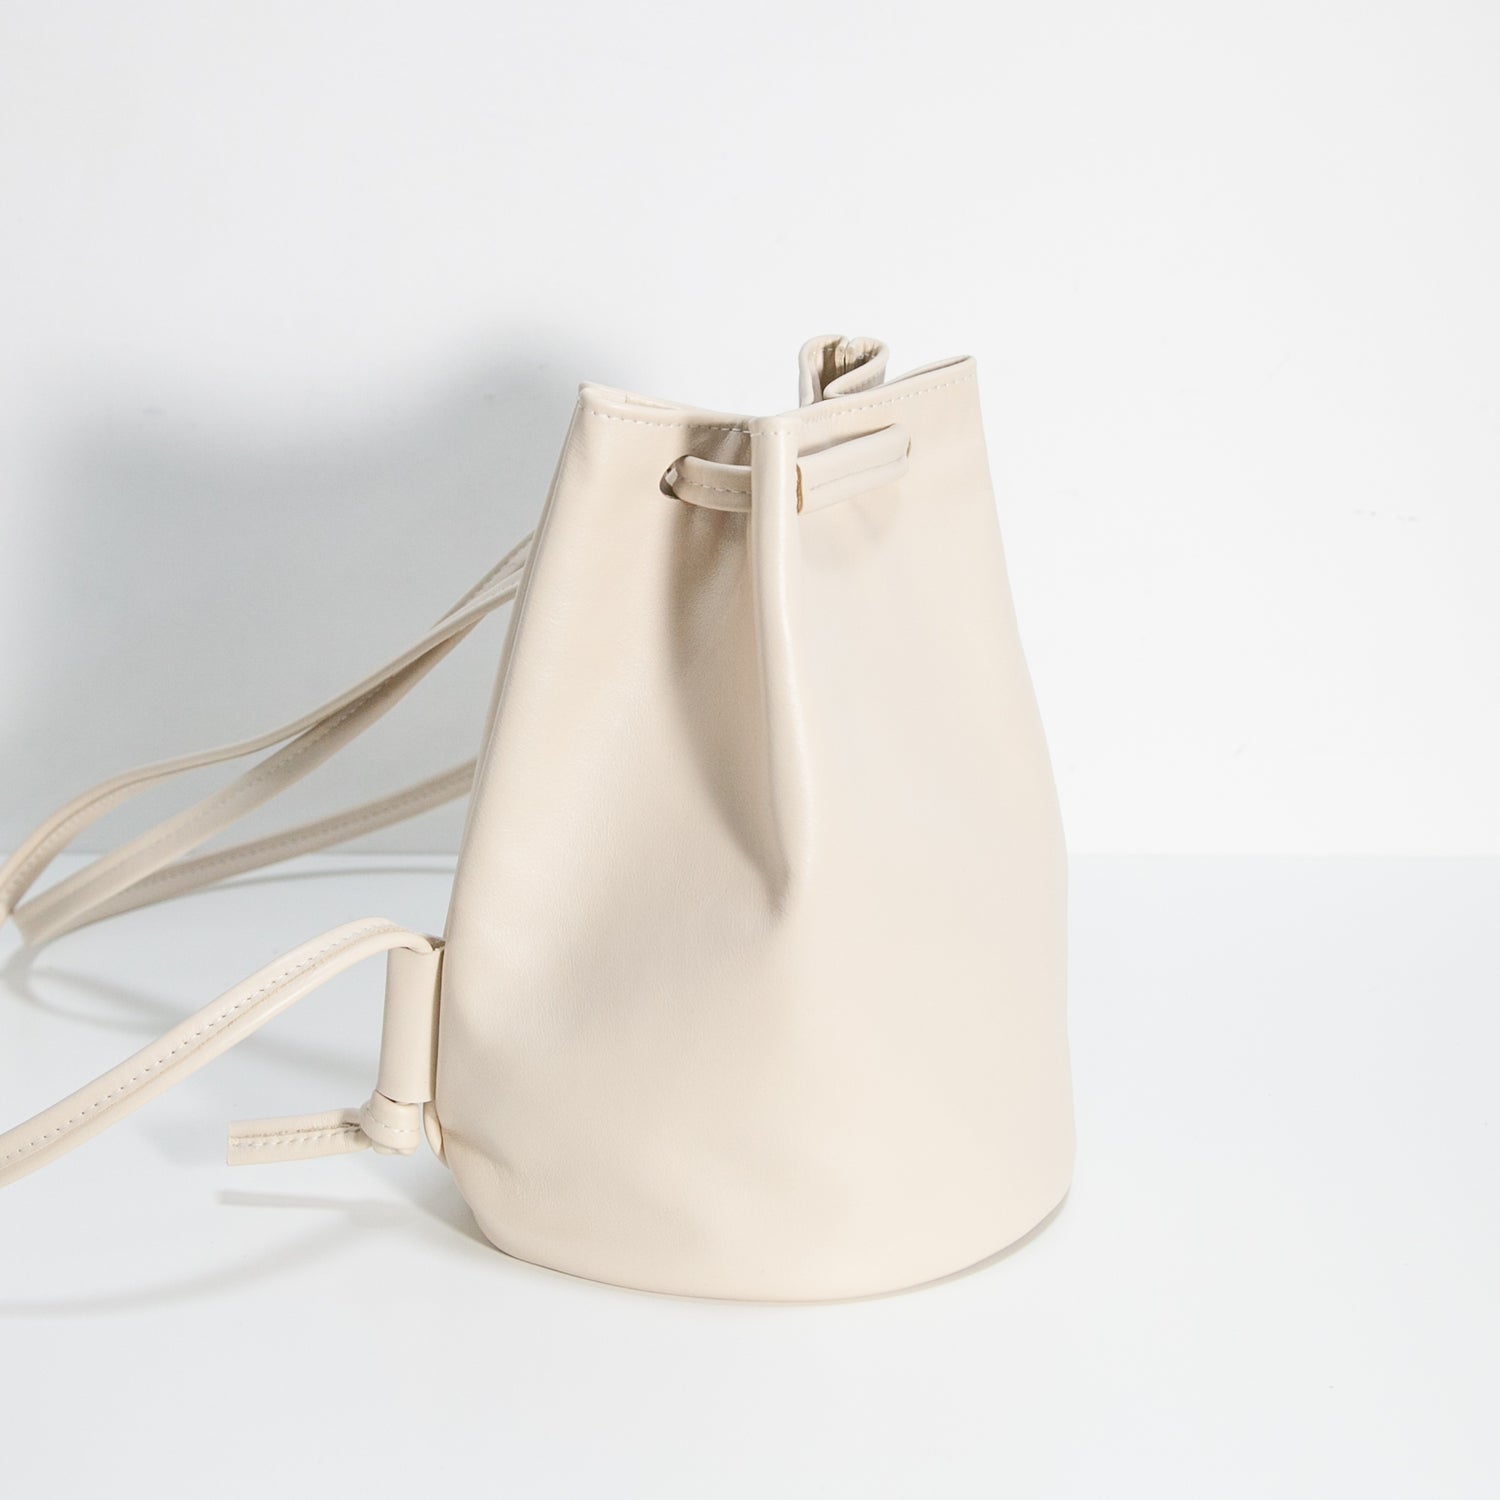 Small Hours  Personalized leather goods + minimalist bags